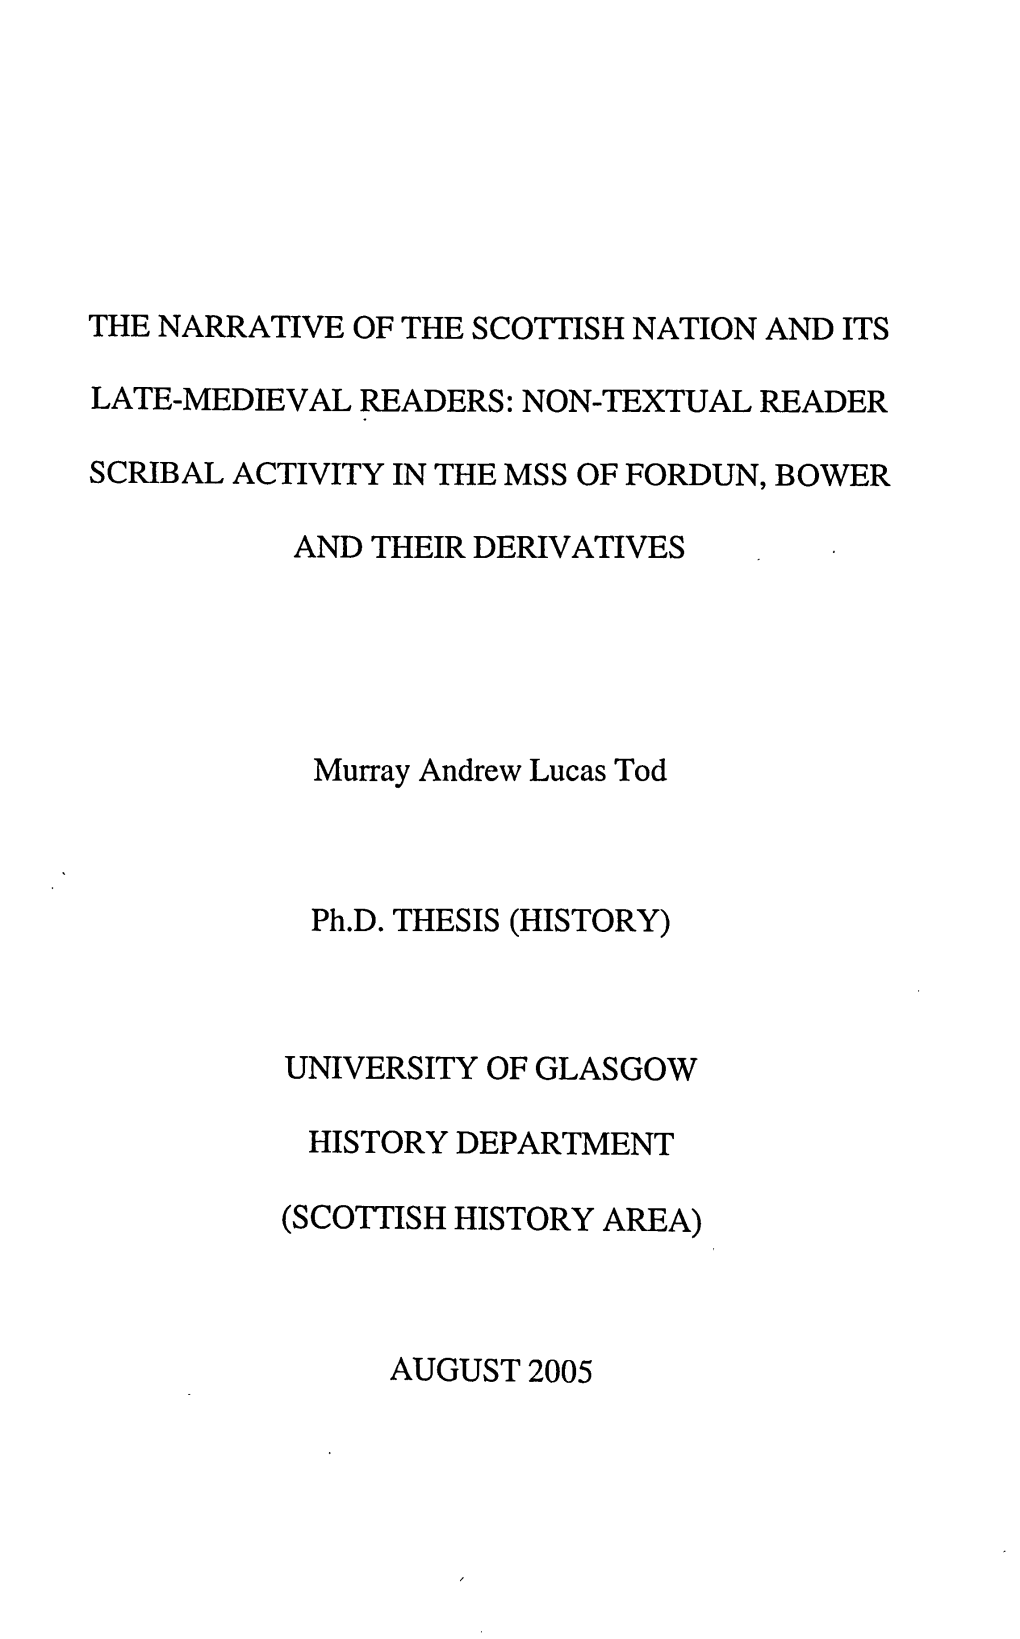 The Narrative of the Scottish Nation and Its Scribal